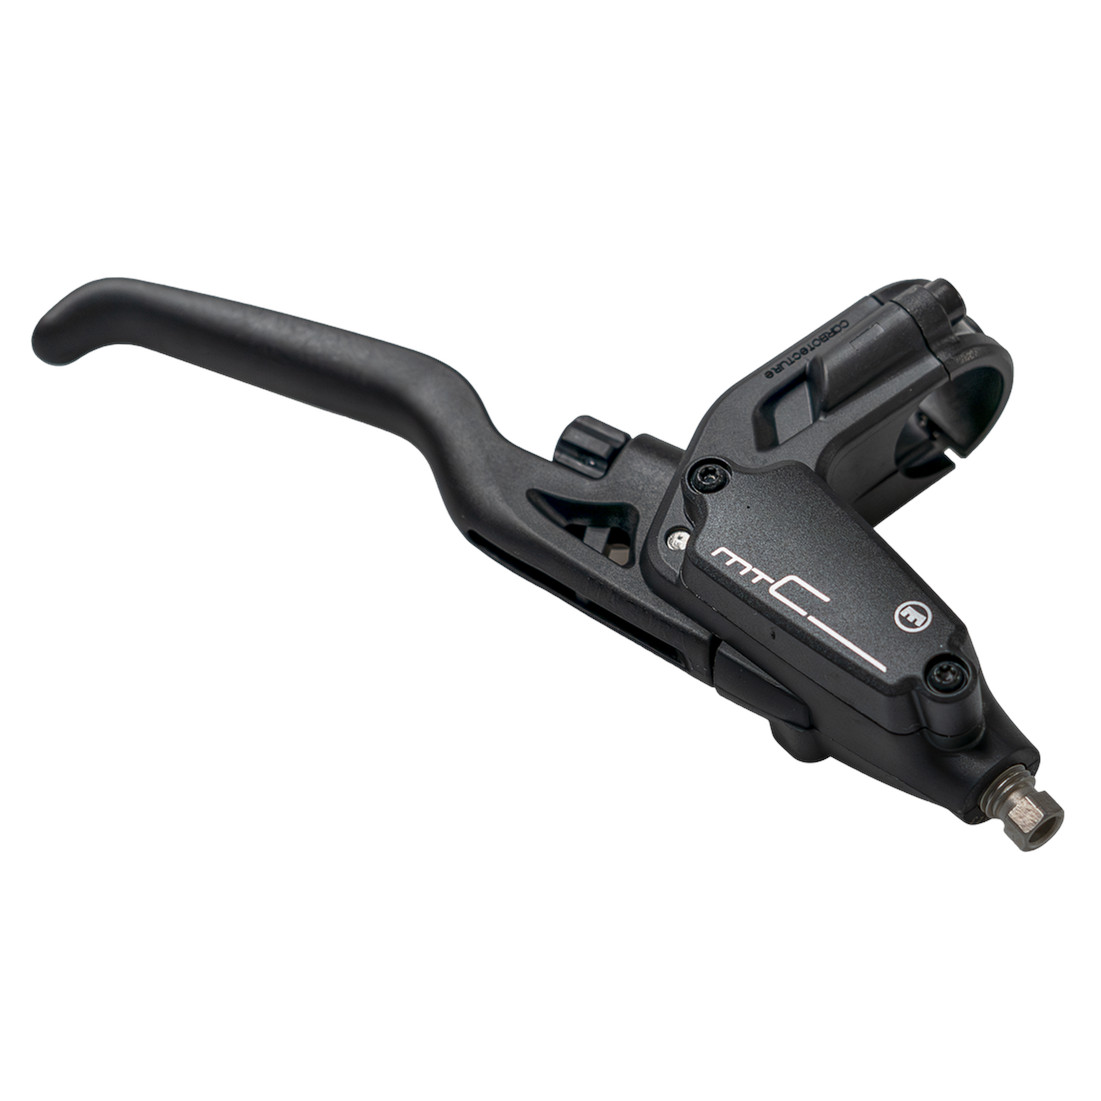 Image of Magura Brake Lever MT C ABS - 3-Finger | Carbotecture - 2702720 - right